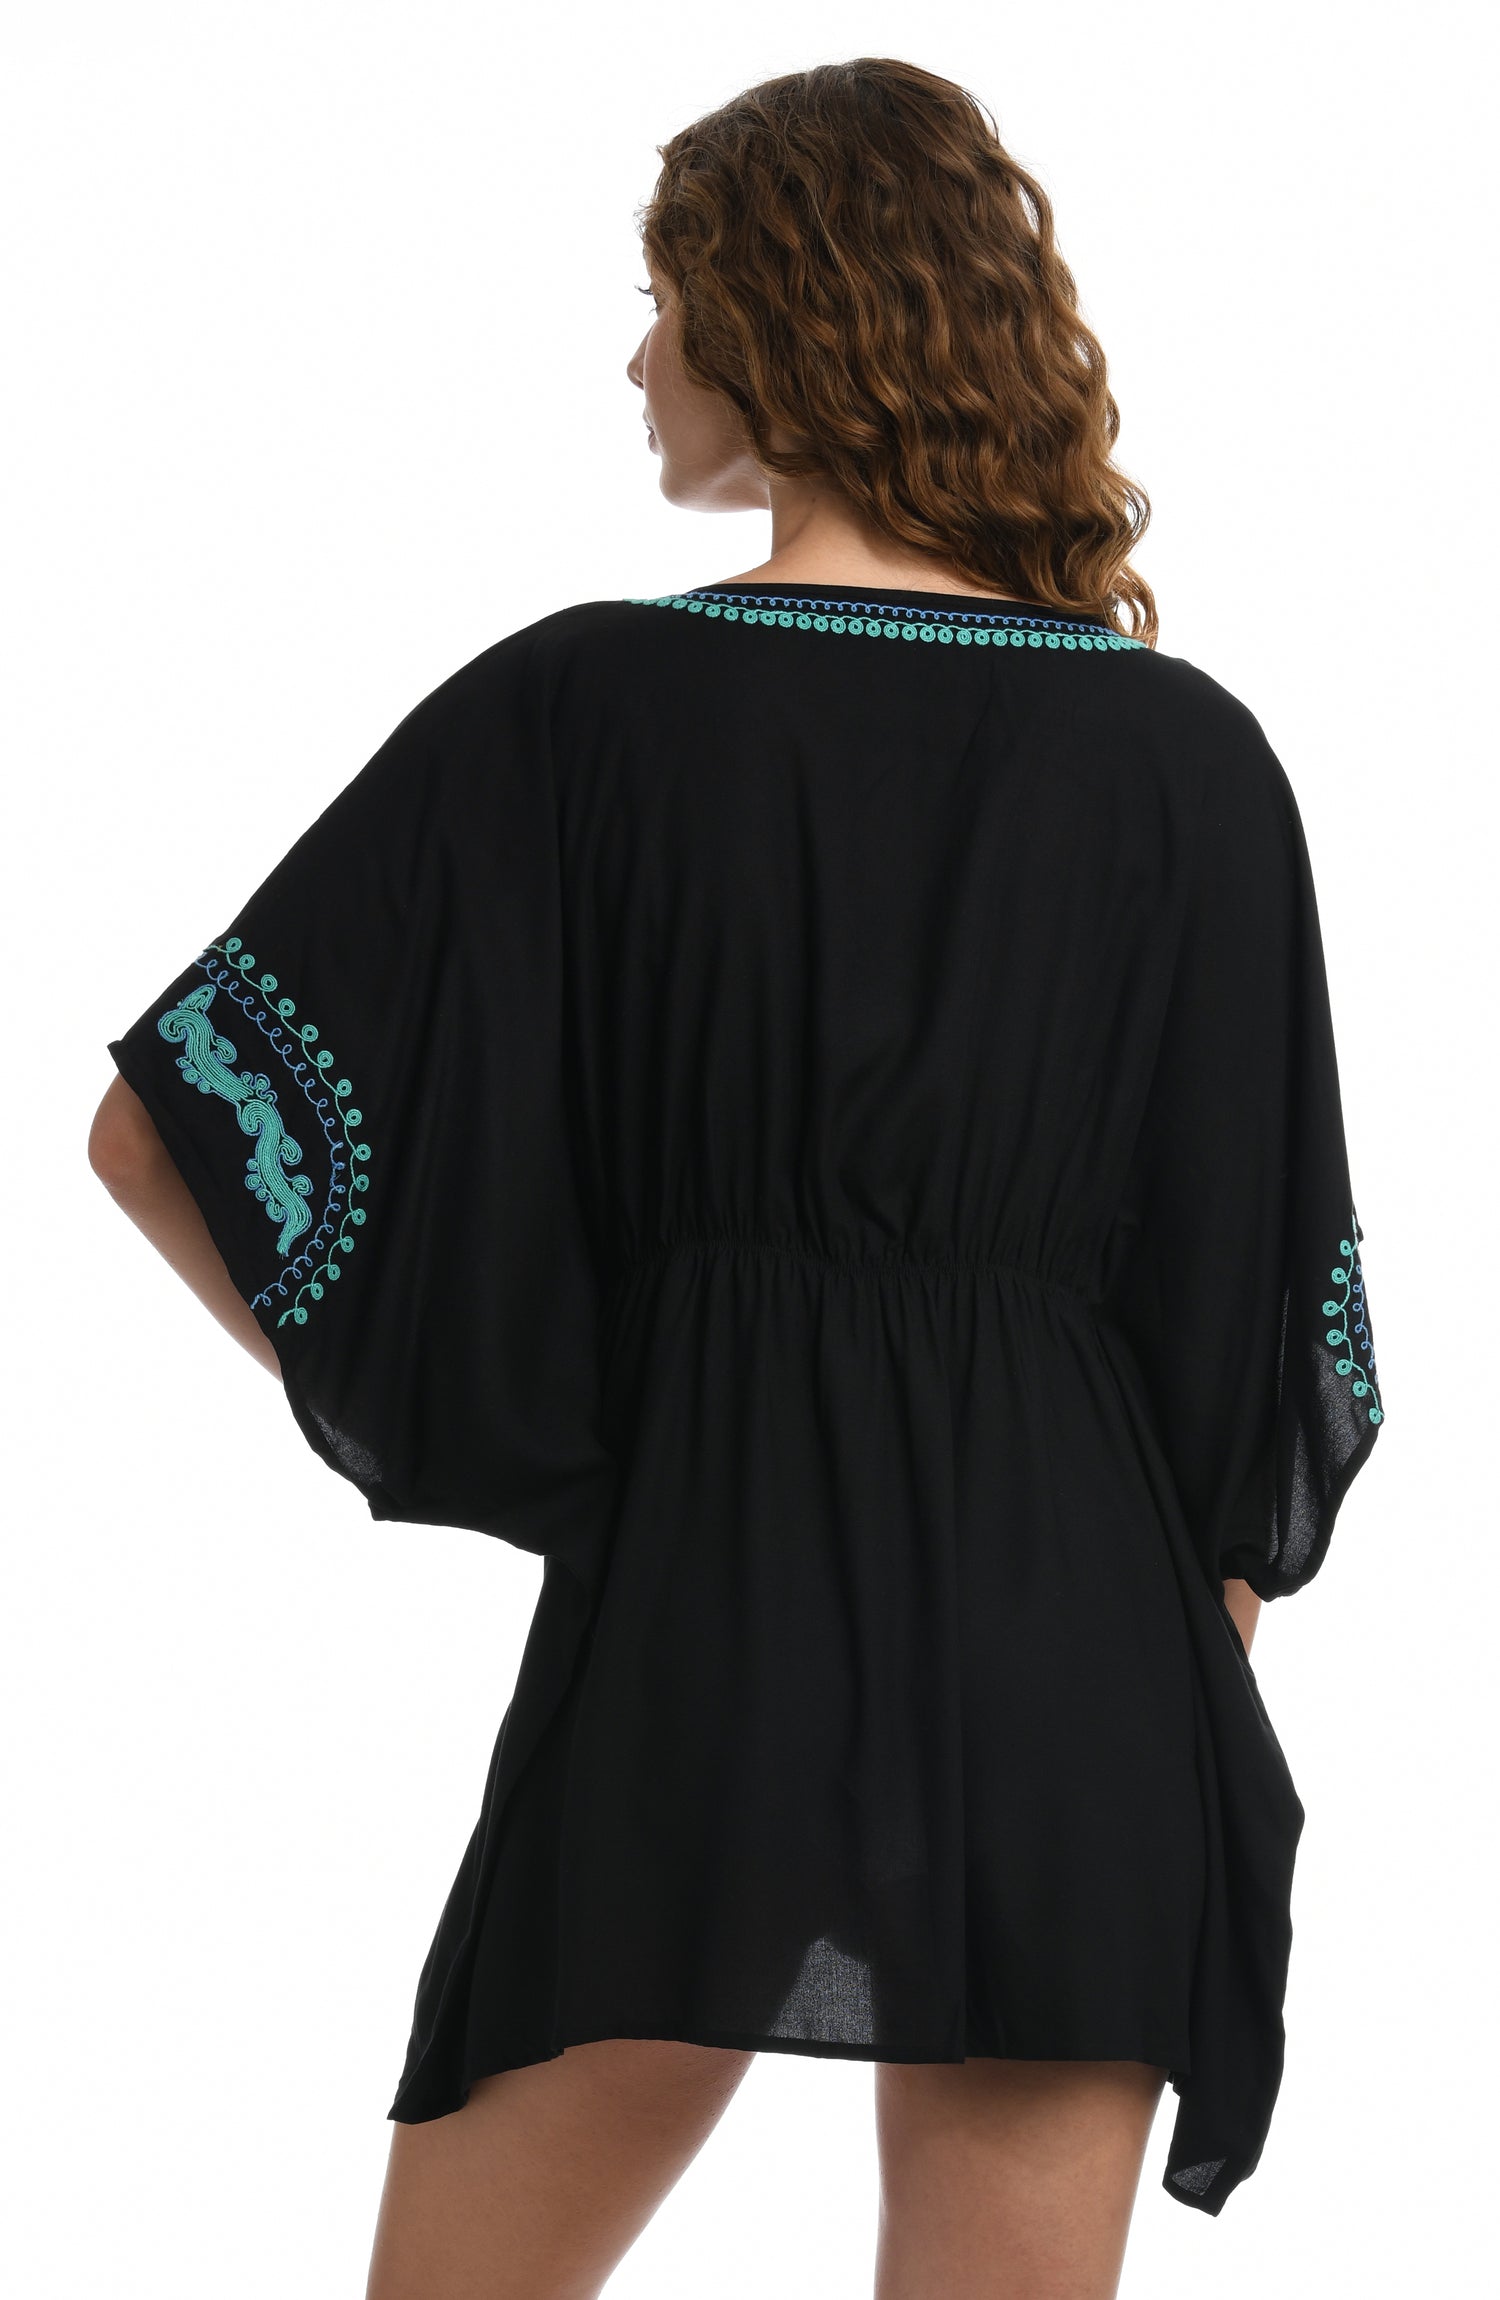 Model is wearing a black V-Neck tunic swimsuit cover up detailed with turquoise embroidered accents from our Hippie Trail collection.